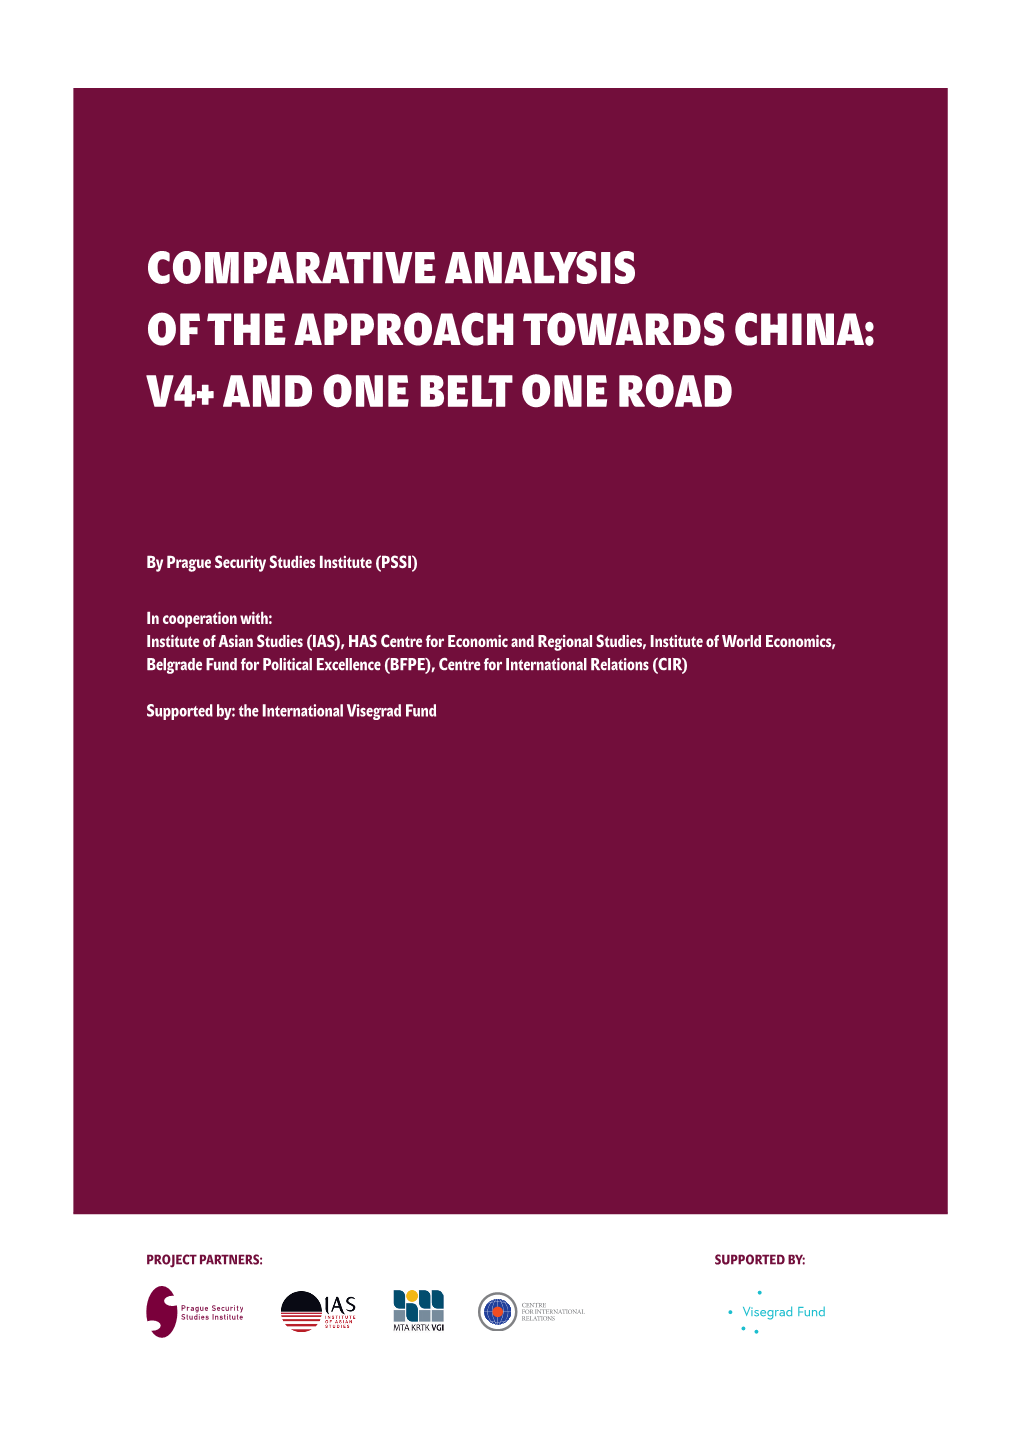 Comparative Analysis of the Approach Towards China: V4+ and One Belt One Road